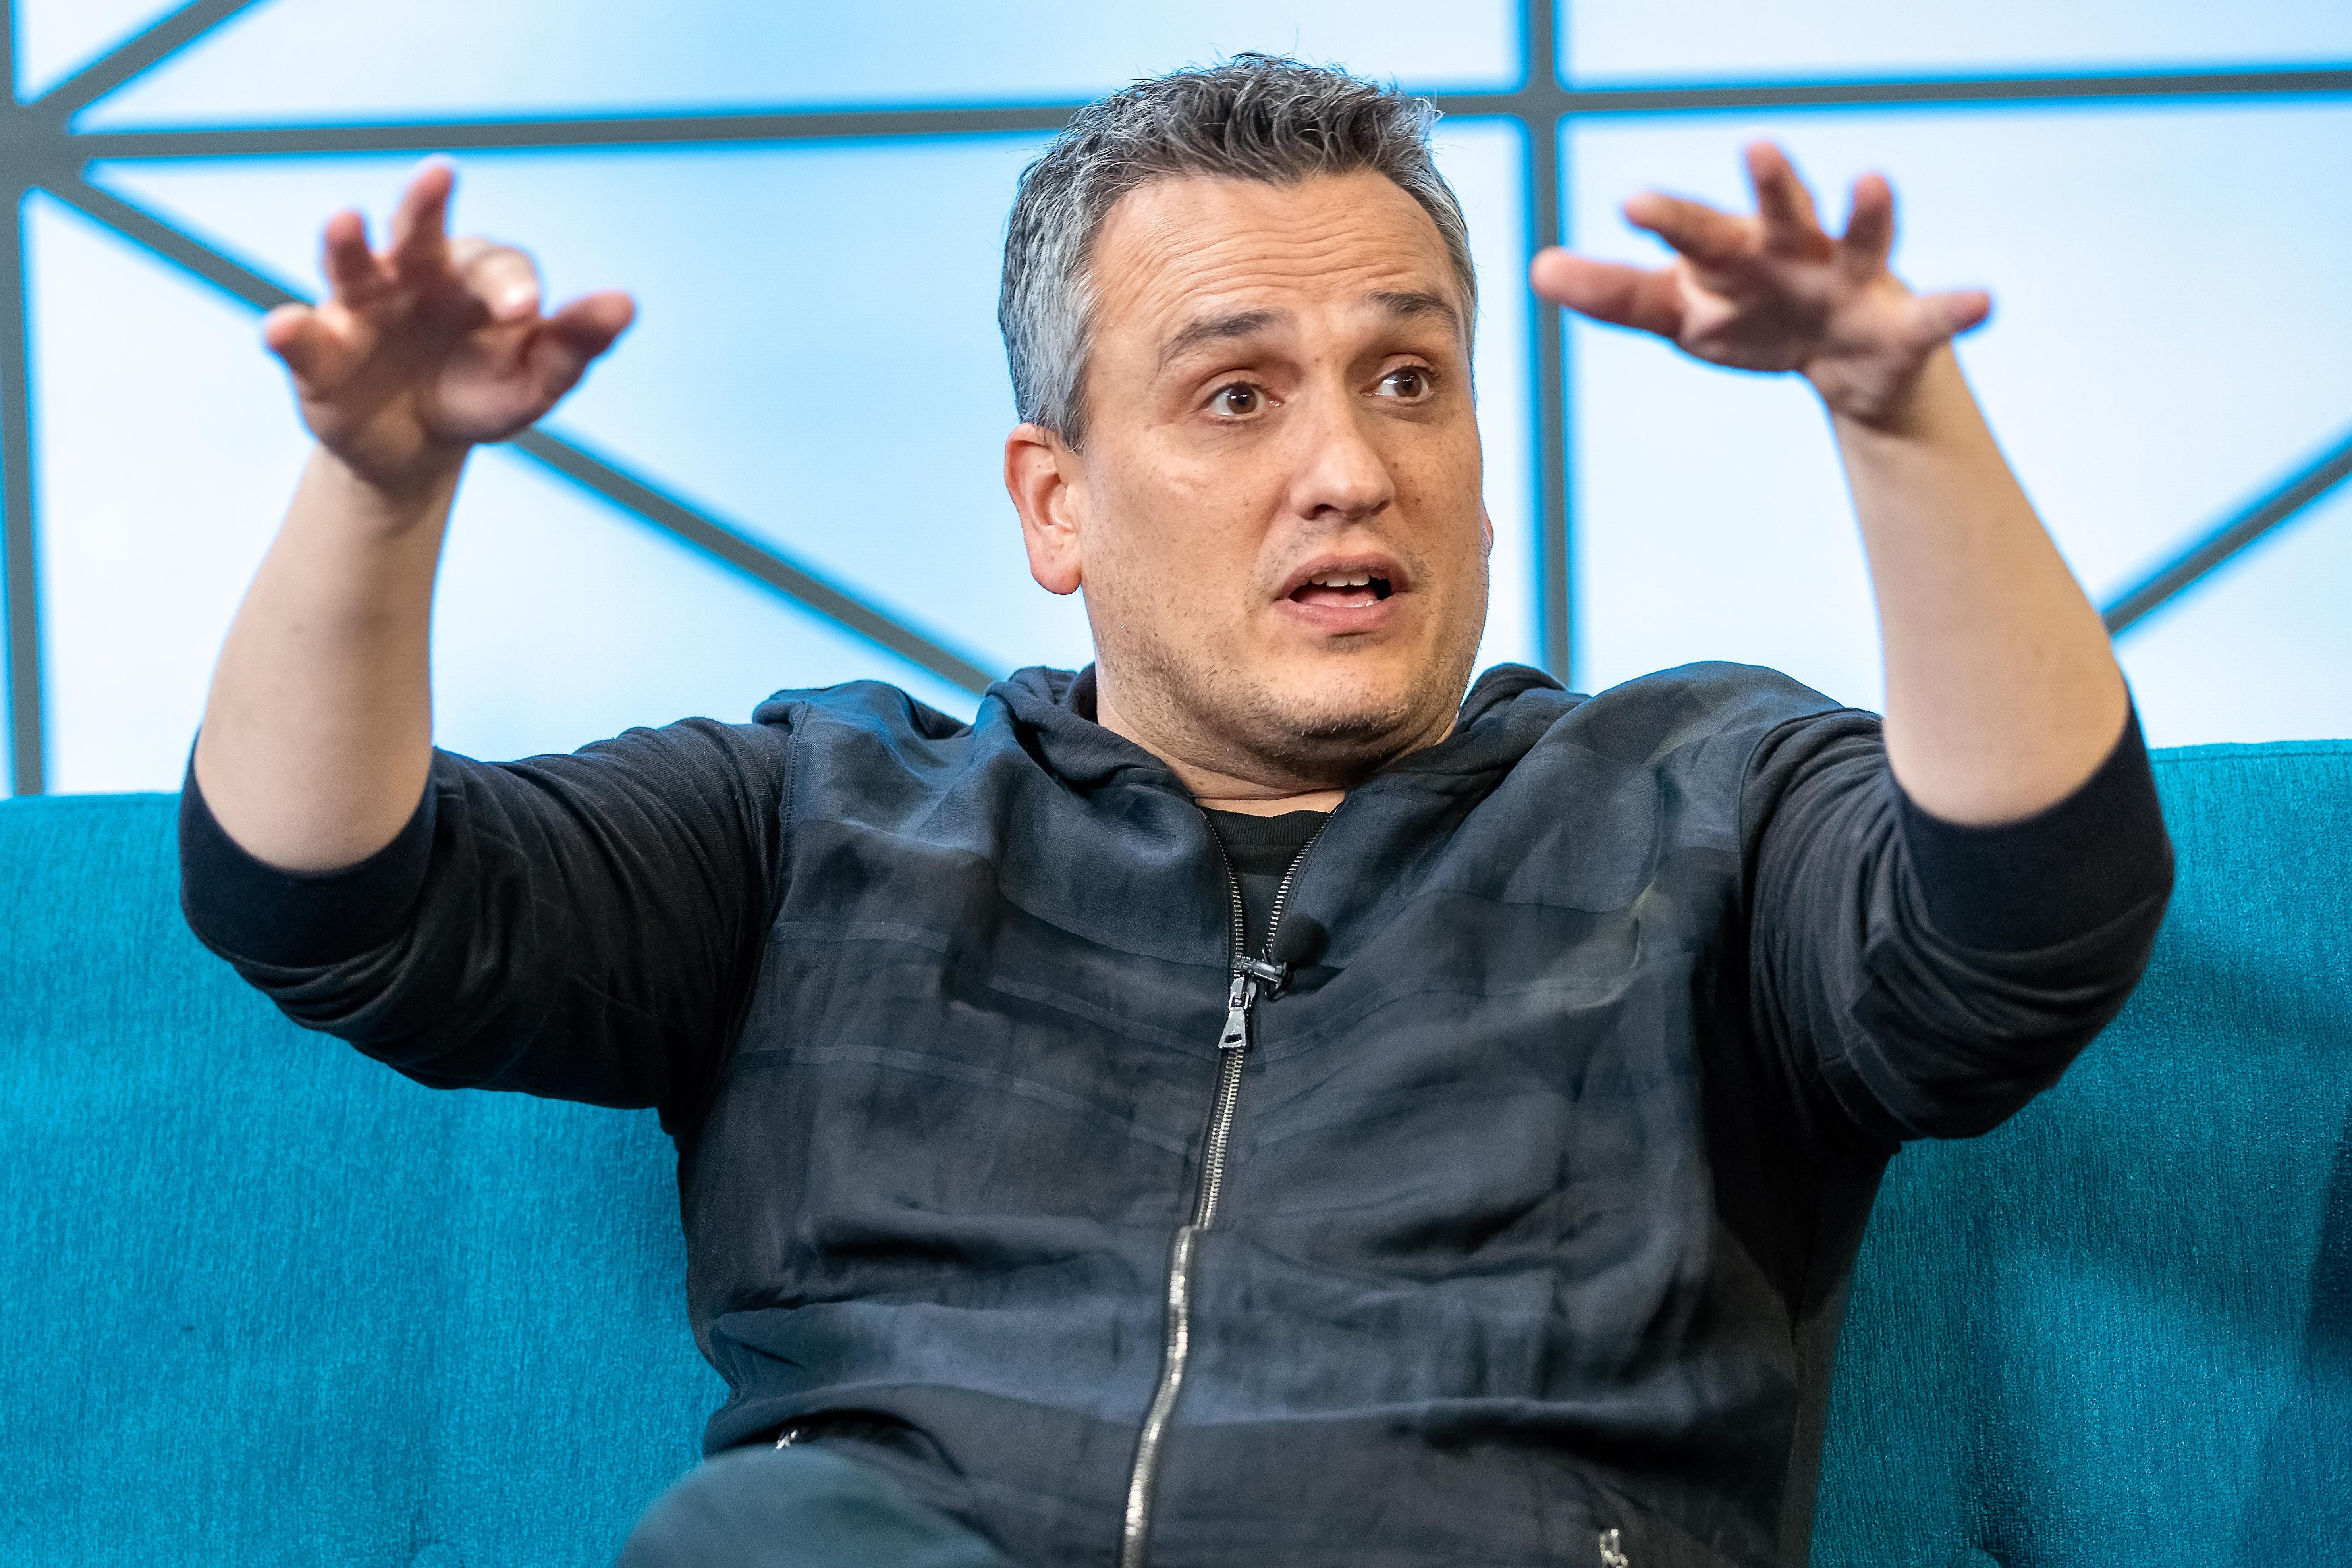 Joe Russo gestures while talking at an event.